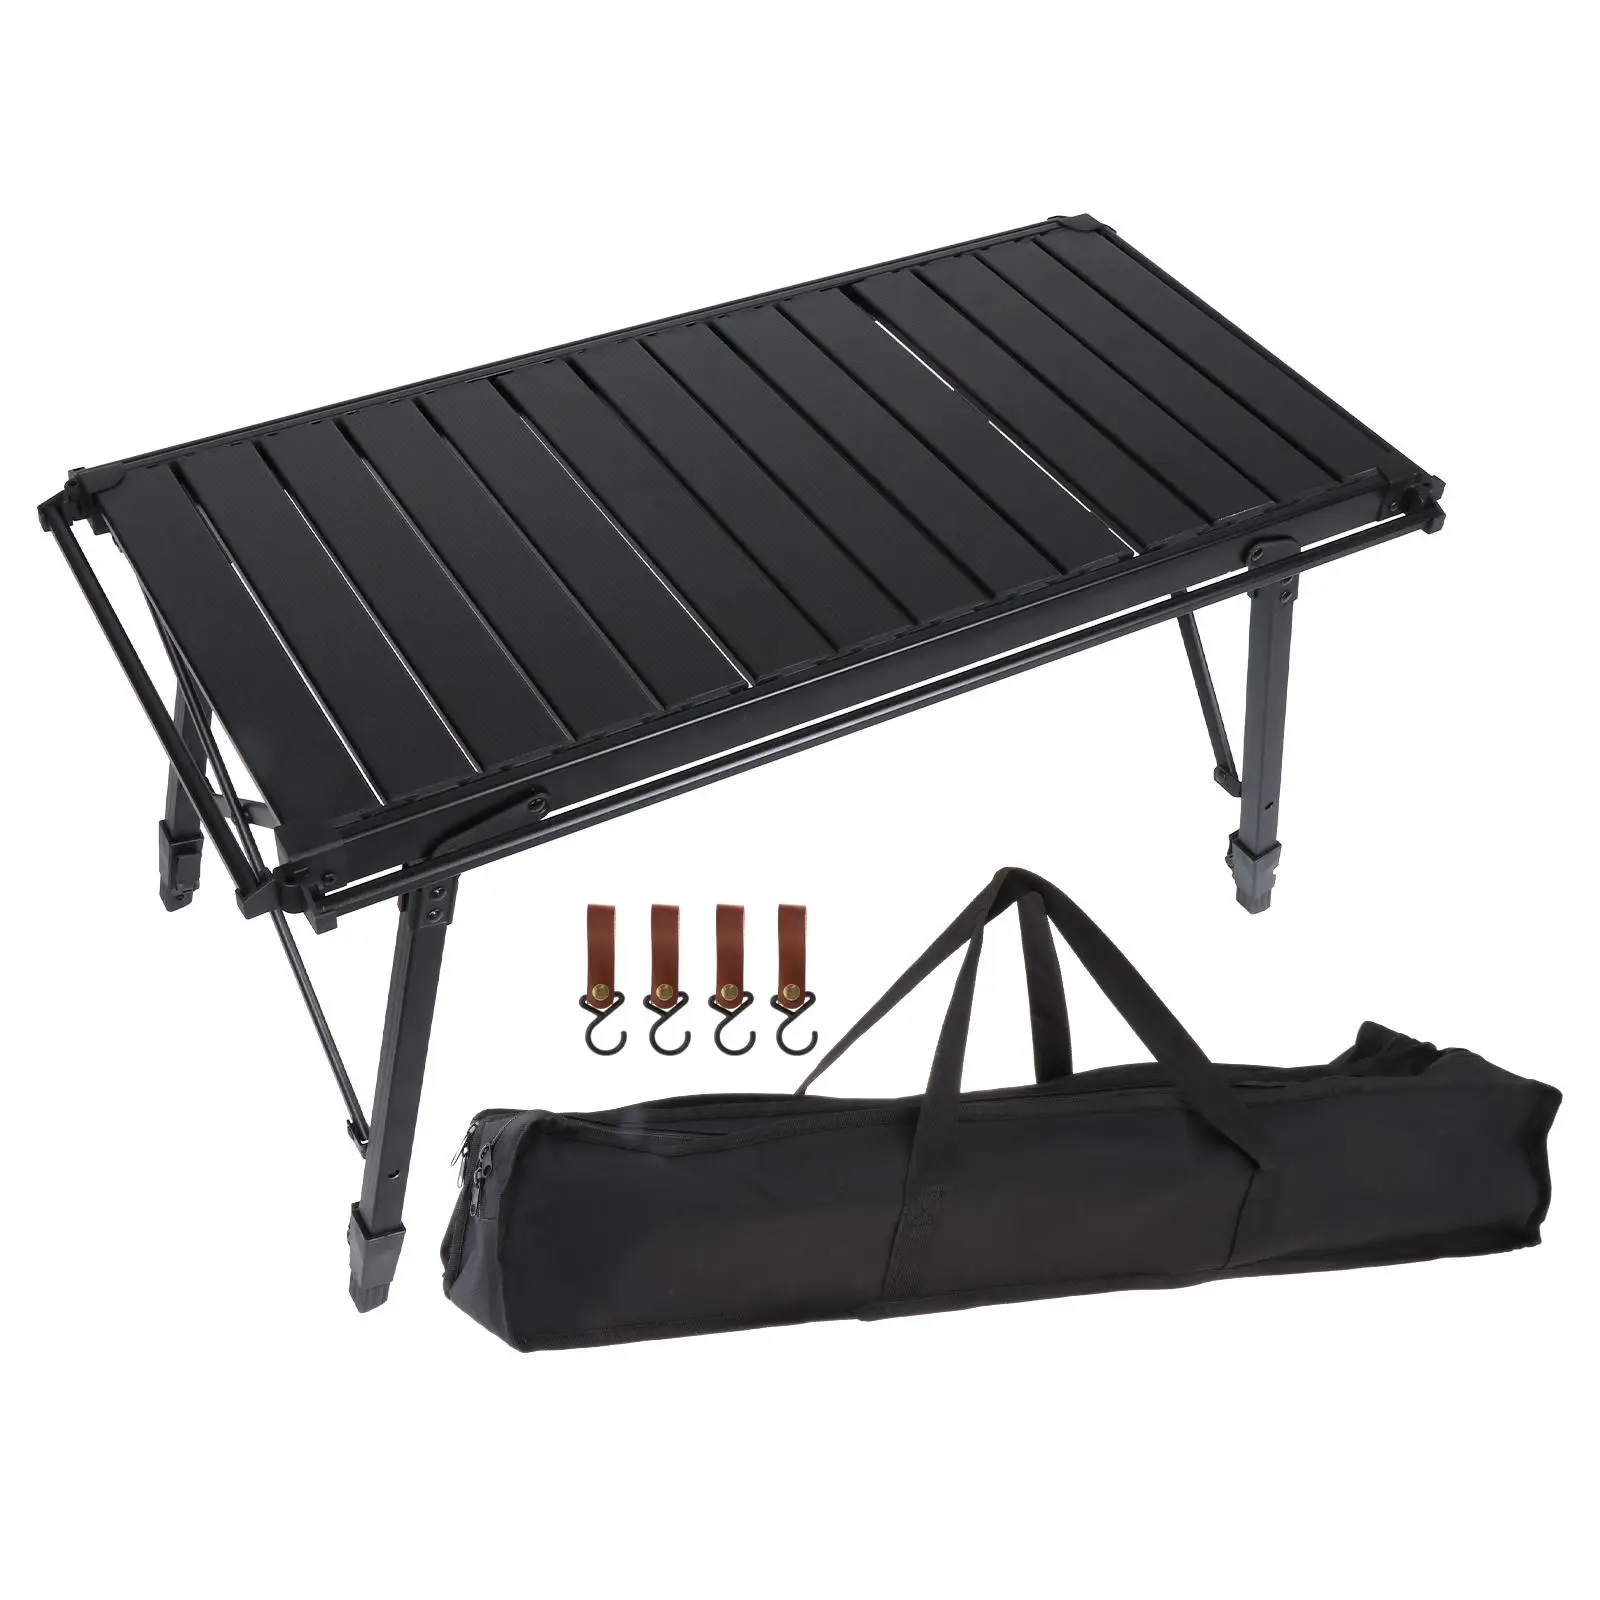 Camping Folding Table Travel Table with Storage Bag Furniture Foldable Picnic Table for Outdoor Balcony Deck Hiking Equipment